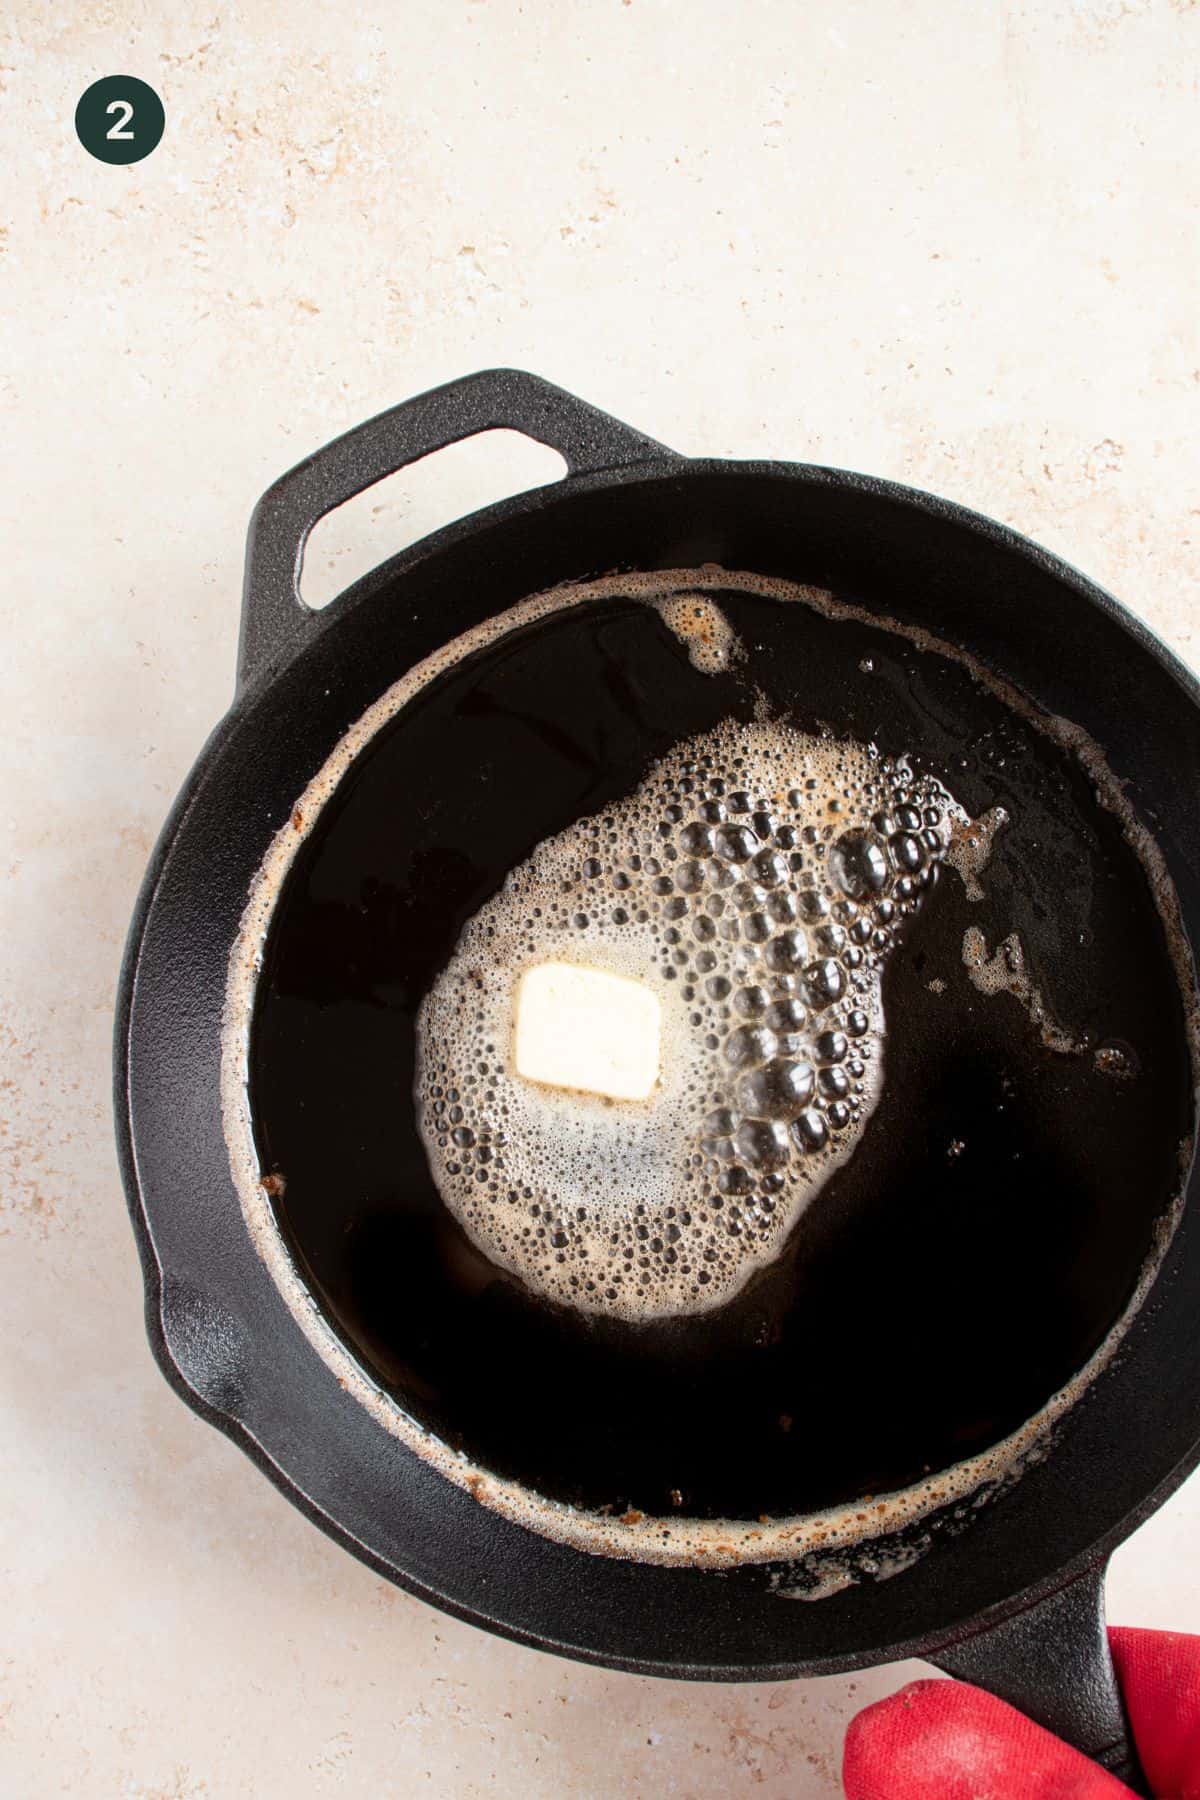 Butter melted in a cast iron skillet.